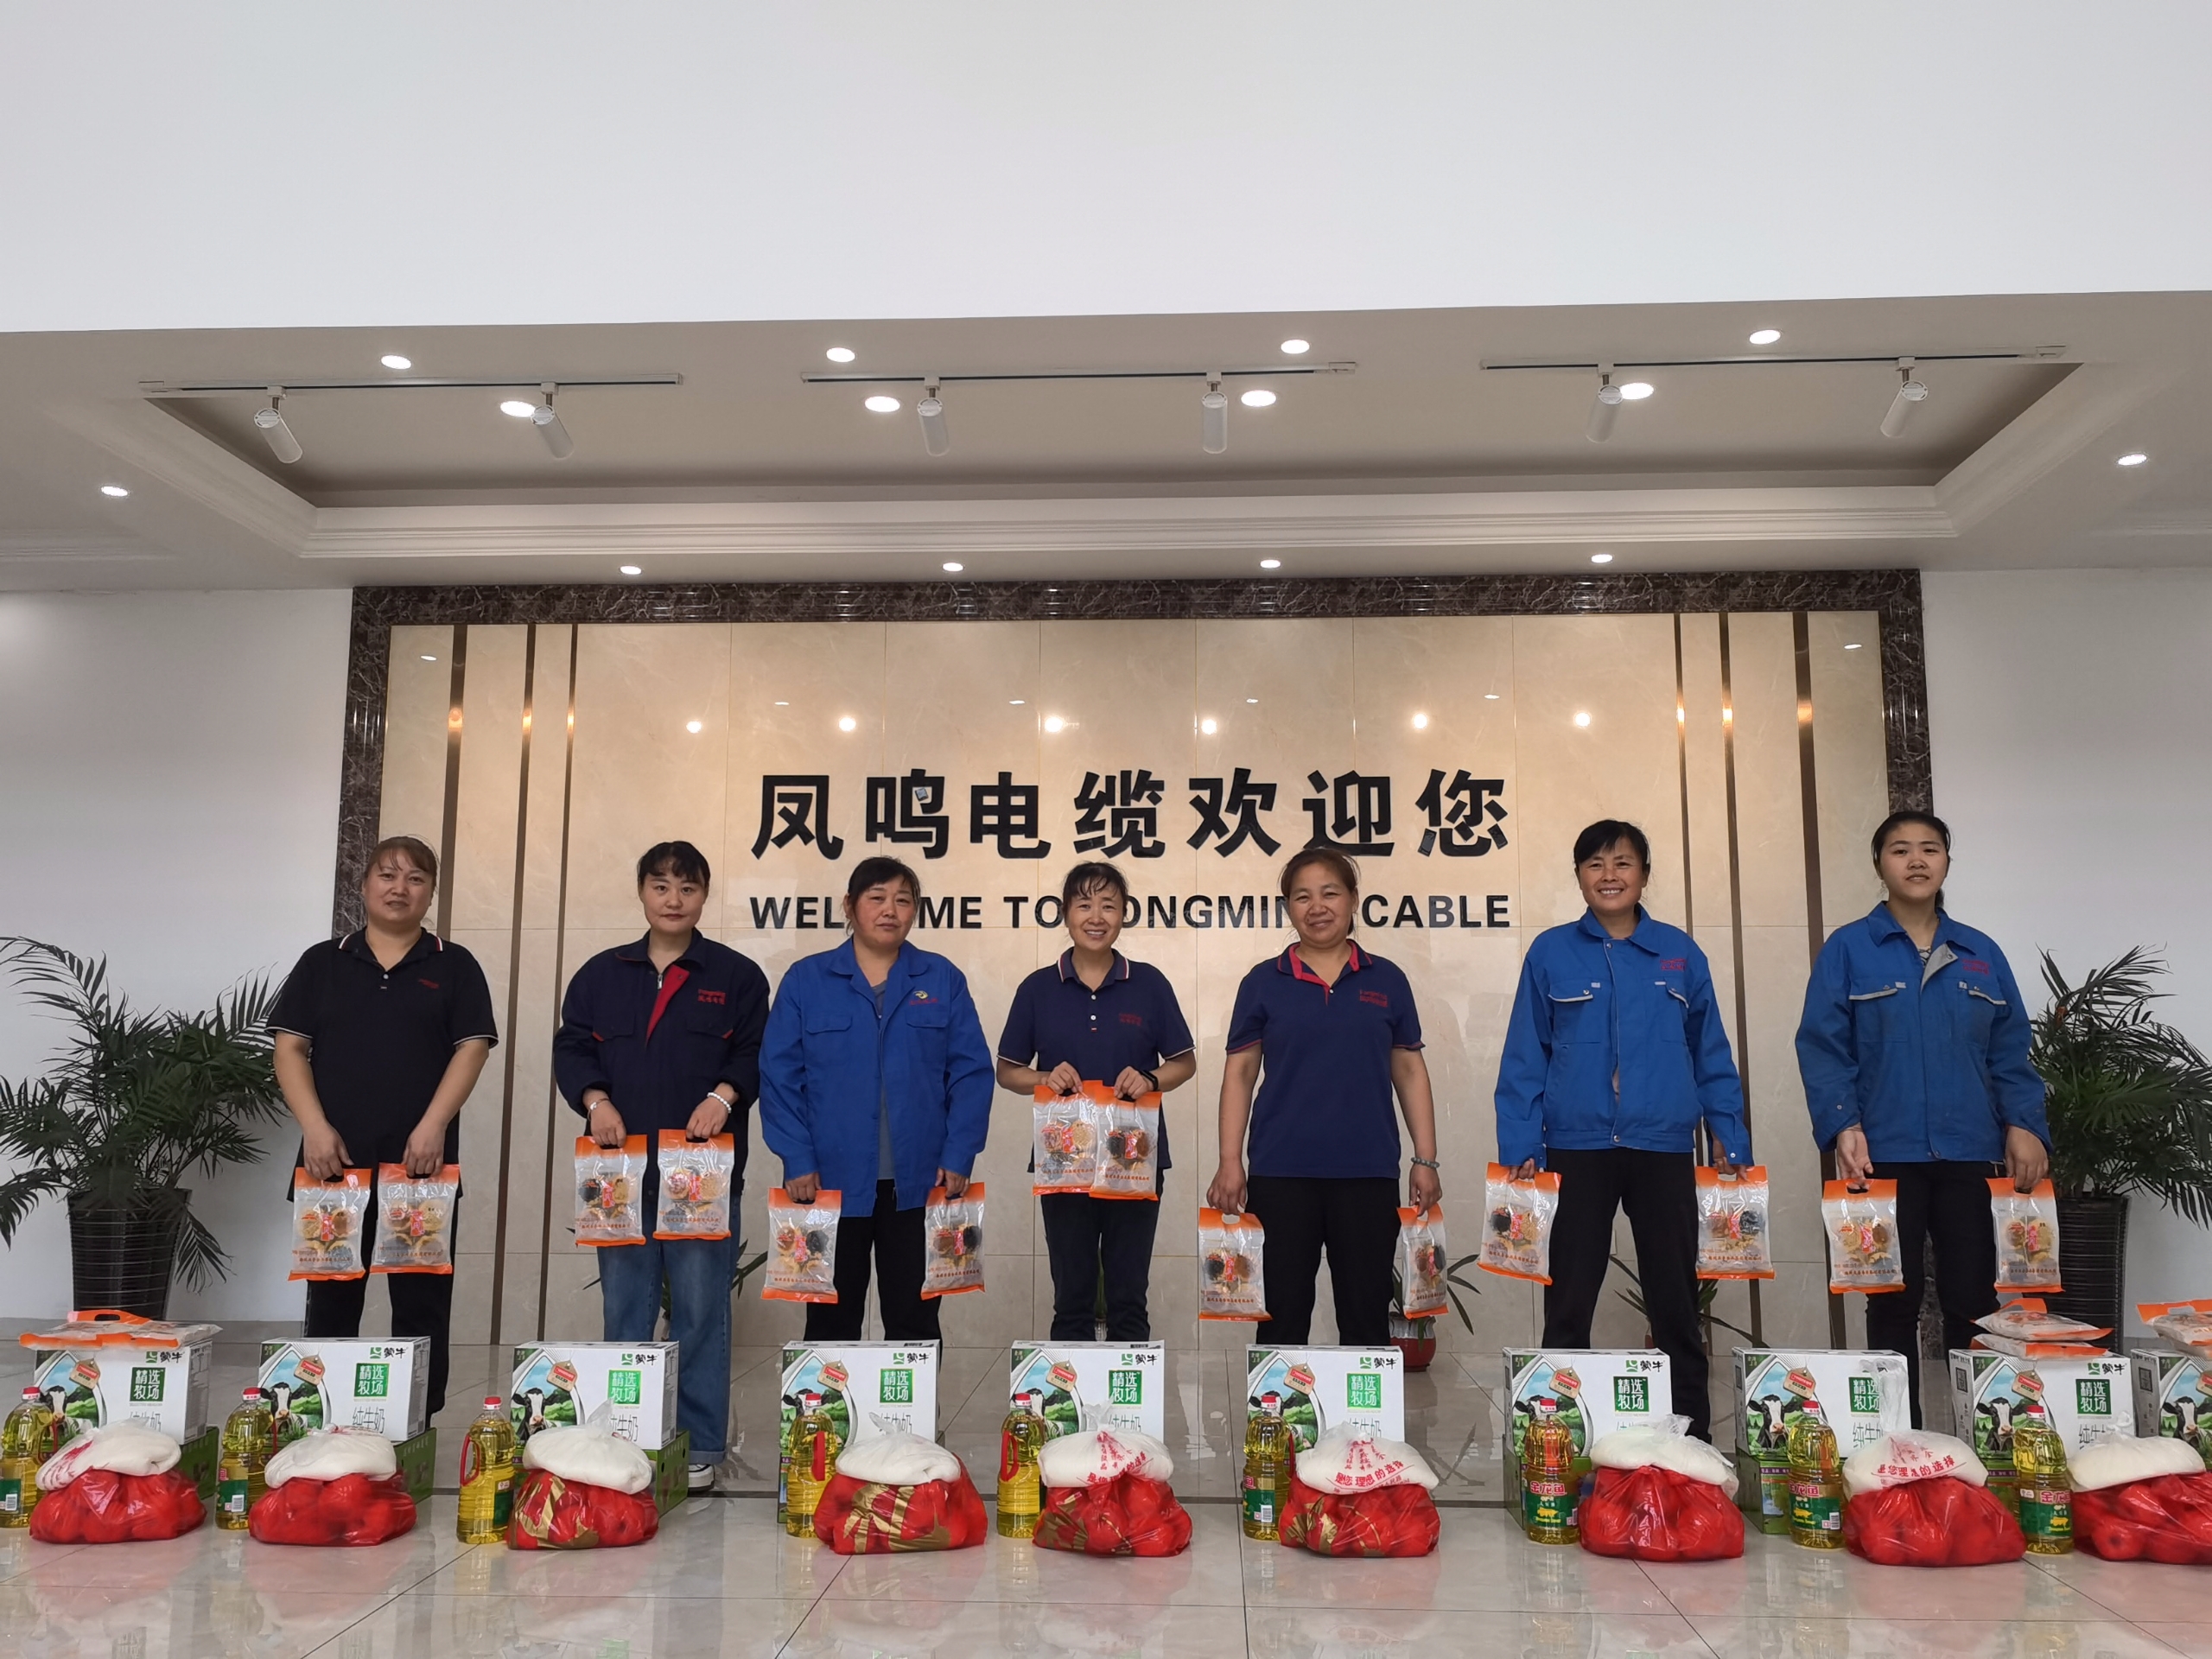 Chairman of the People's Congress of Xiaji Town and representatives of the People's Congress of Baoying County came to guide Fongming Cable's safety production work